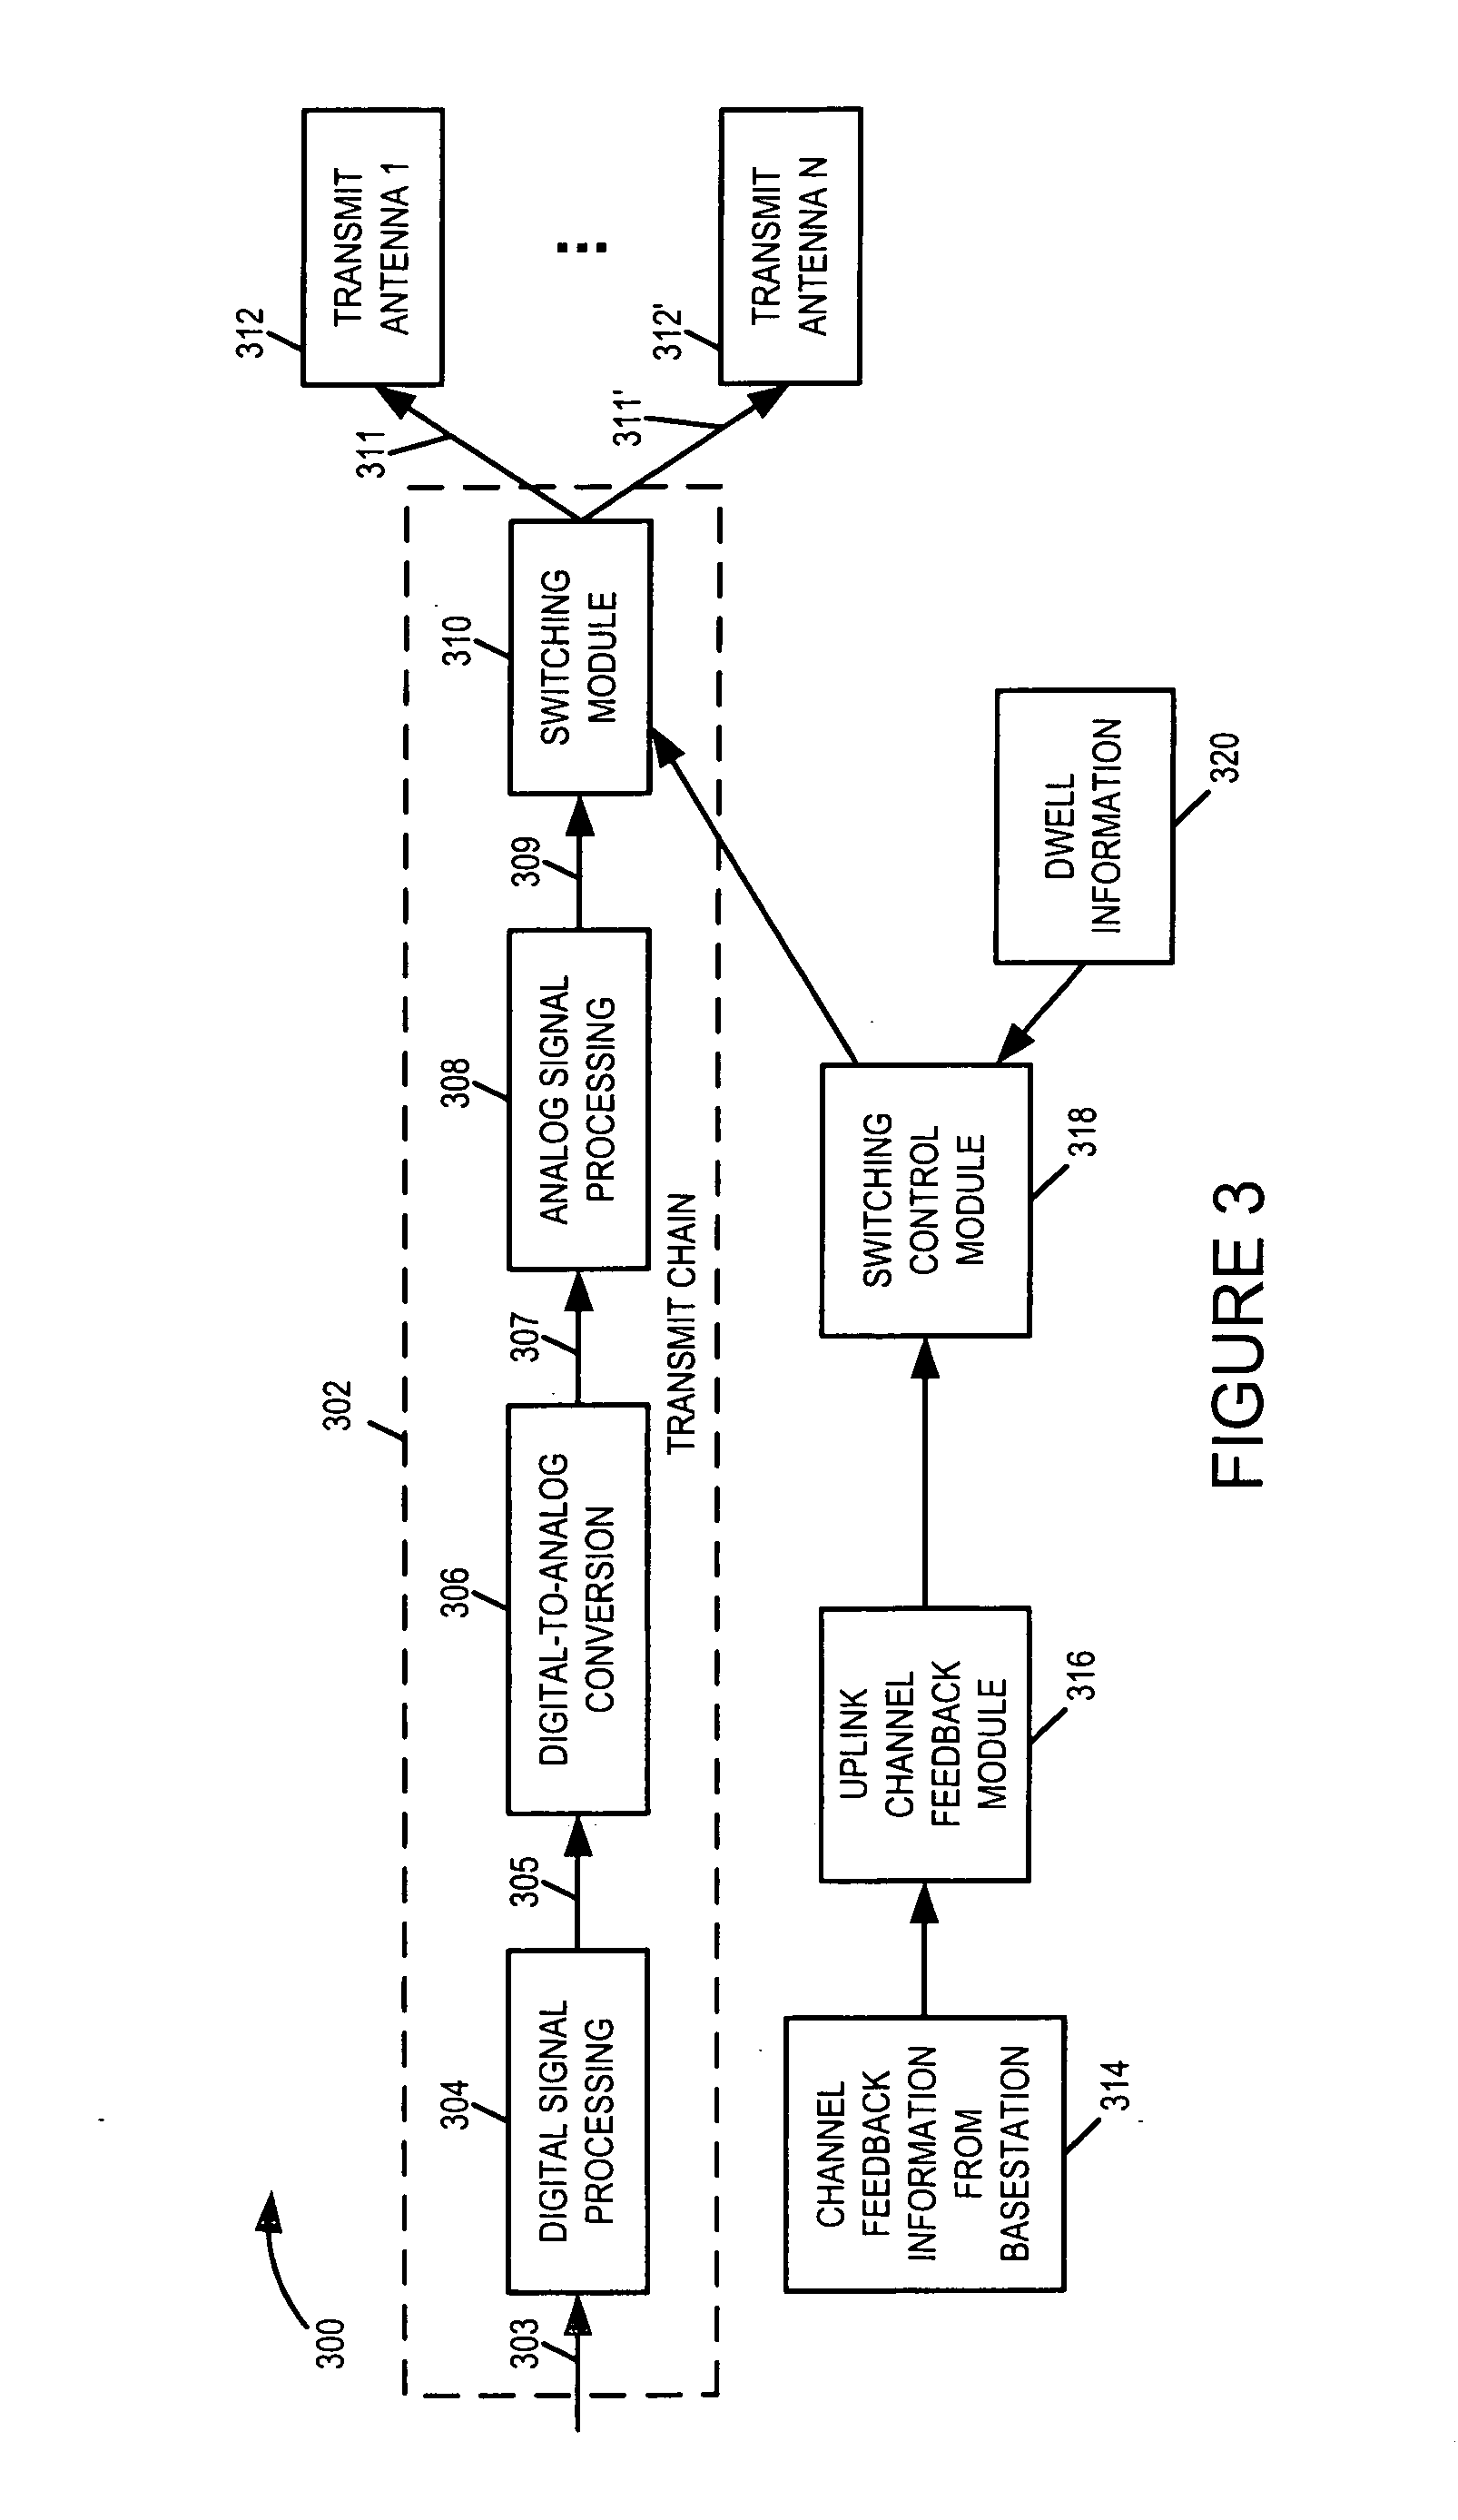 Methods and apparatus of providing transmit and/or receive diversity with multiple antennas in wireless communication systems